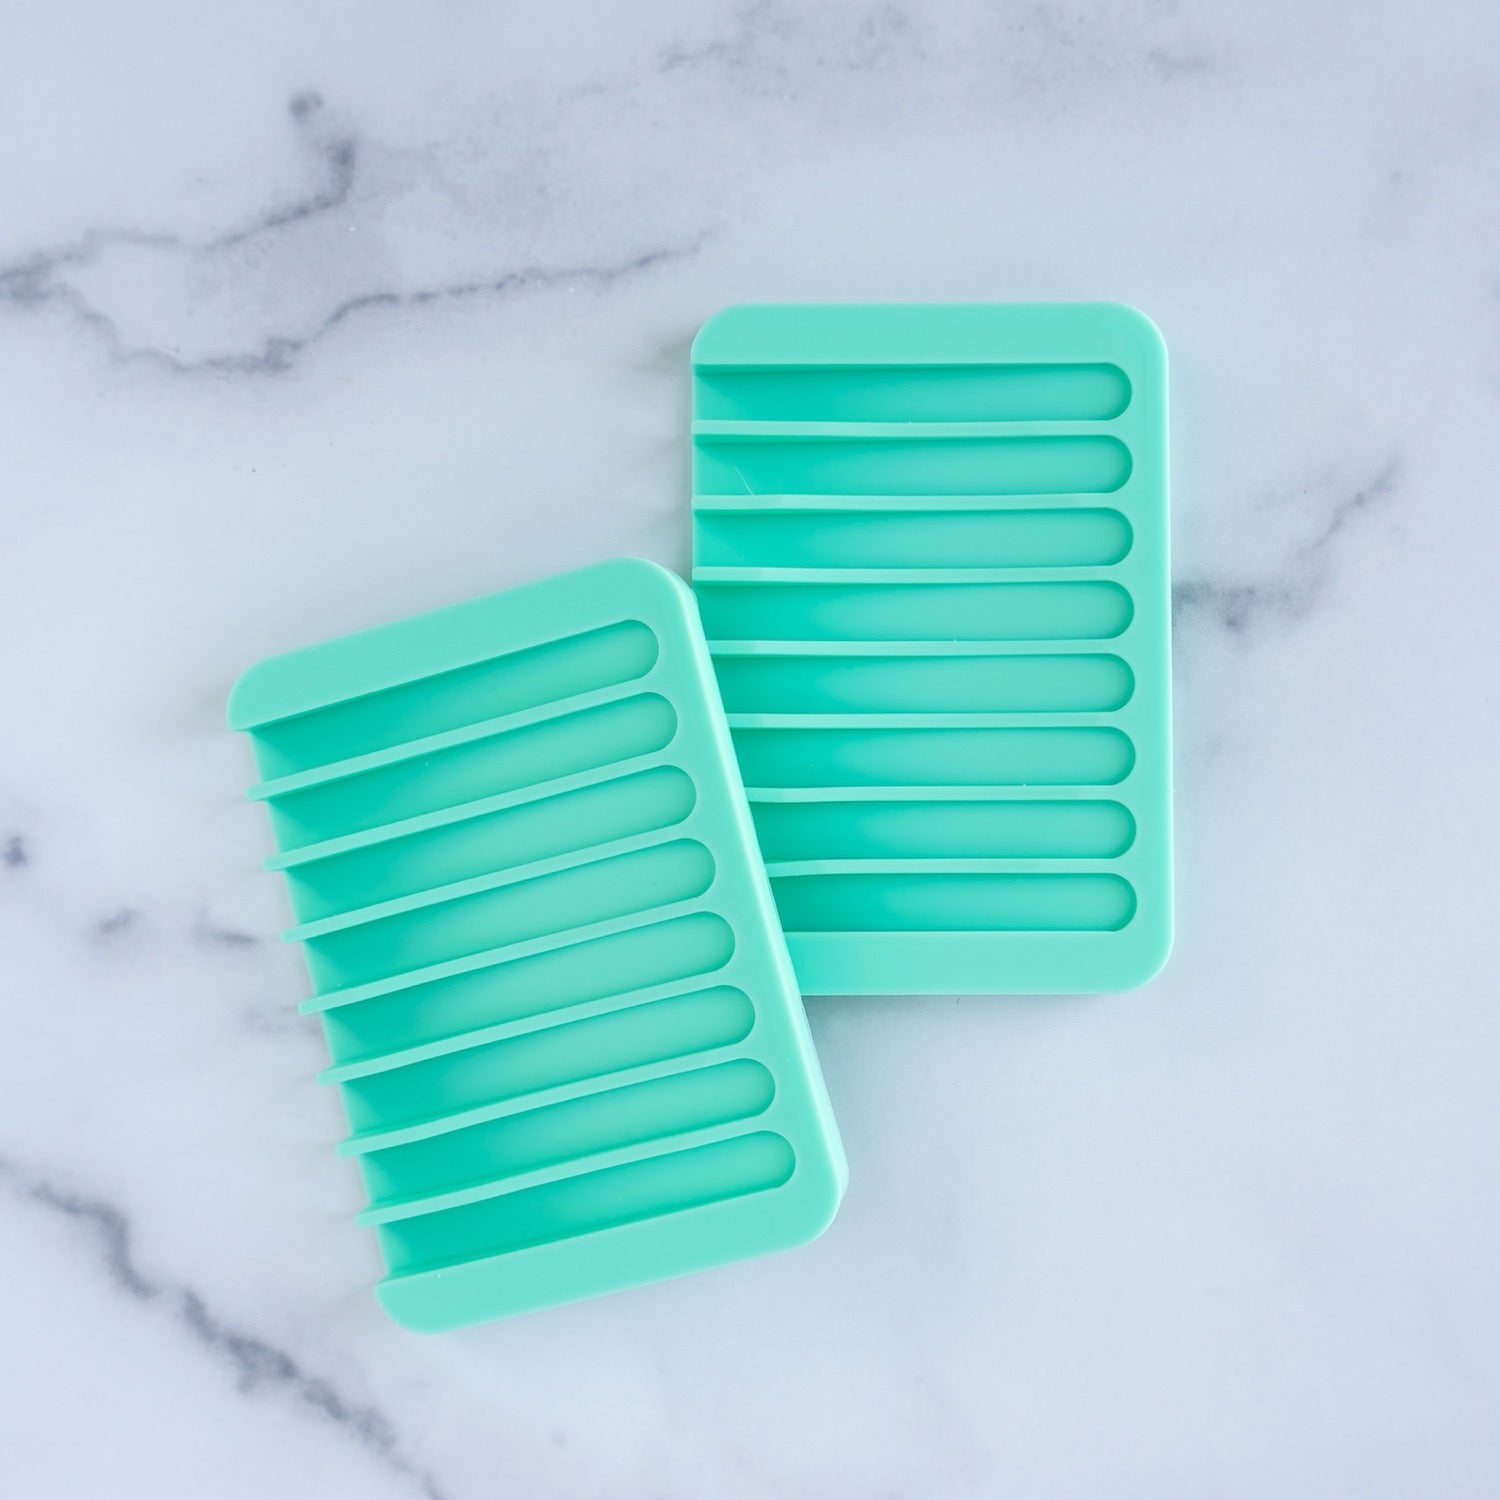 Waterfall Self Draining Silicone Soap Dish – Vintage Green Review